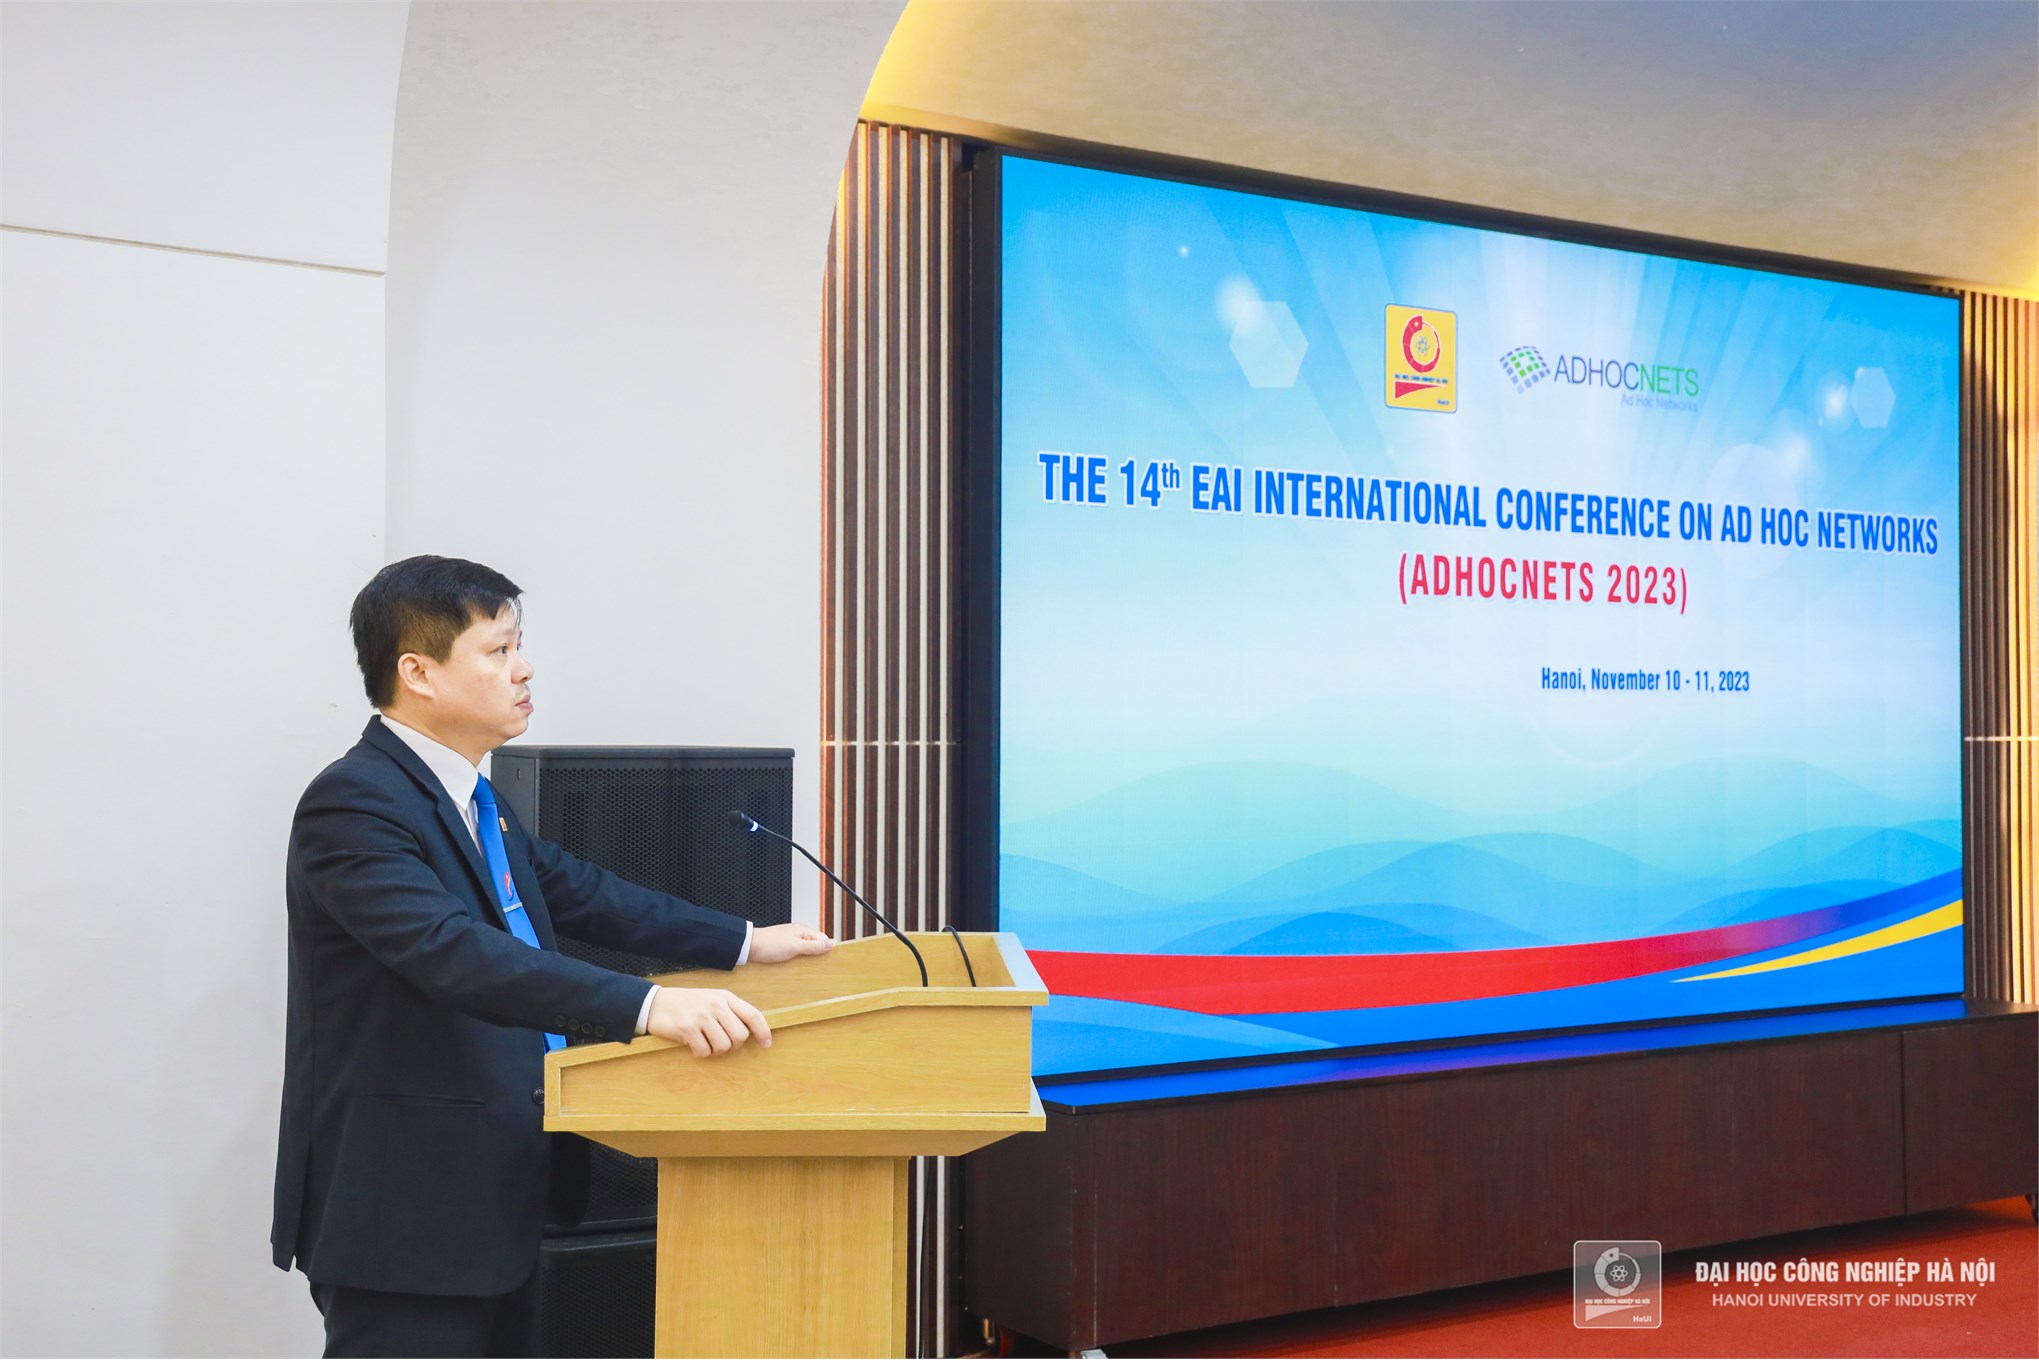 The 14th EAI International Conference on Ad Hoc Networks